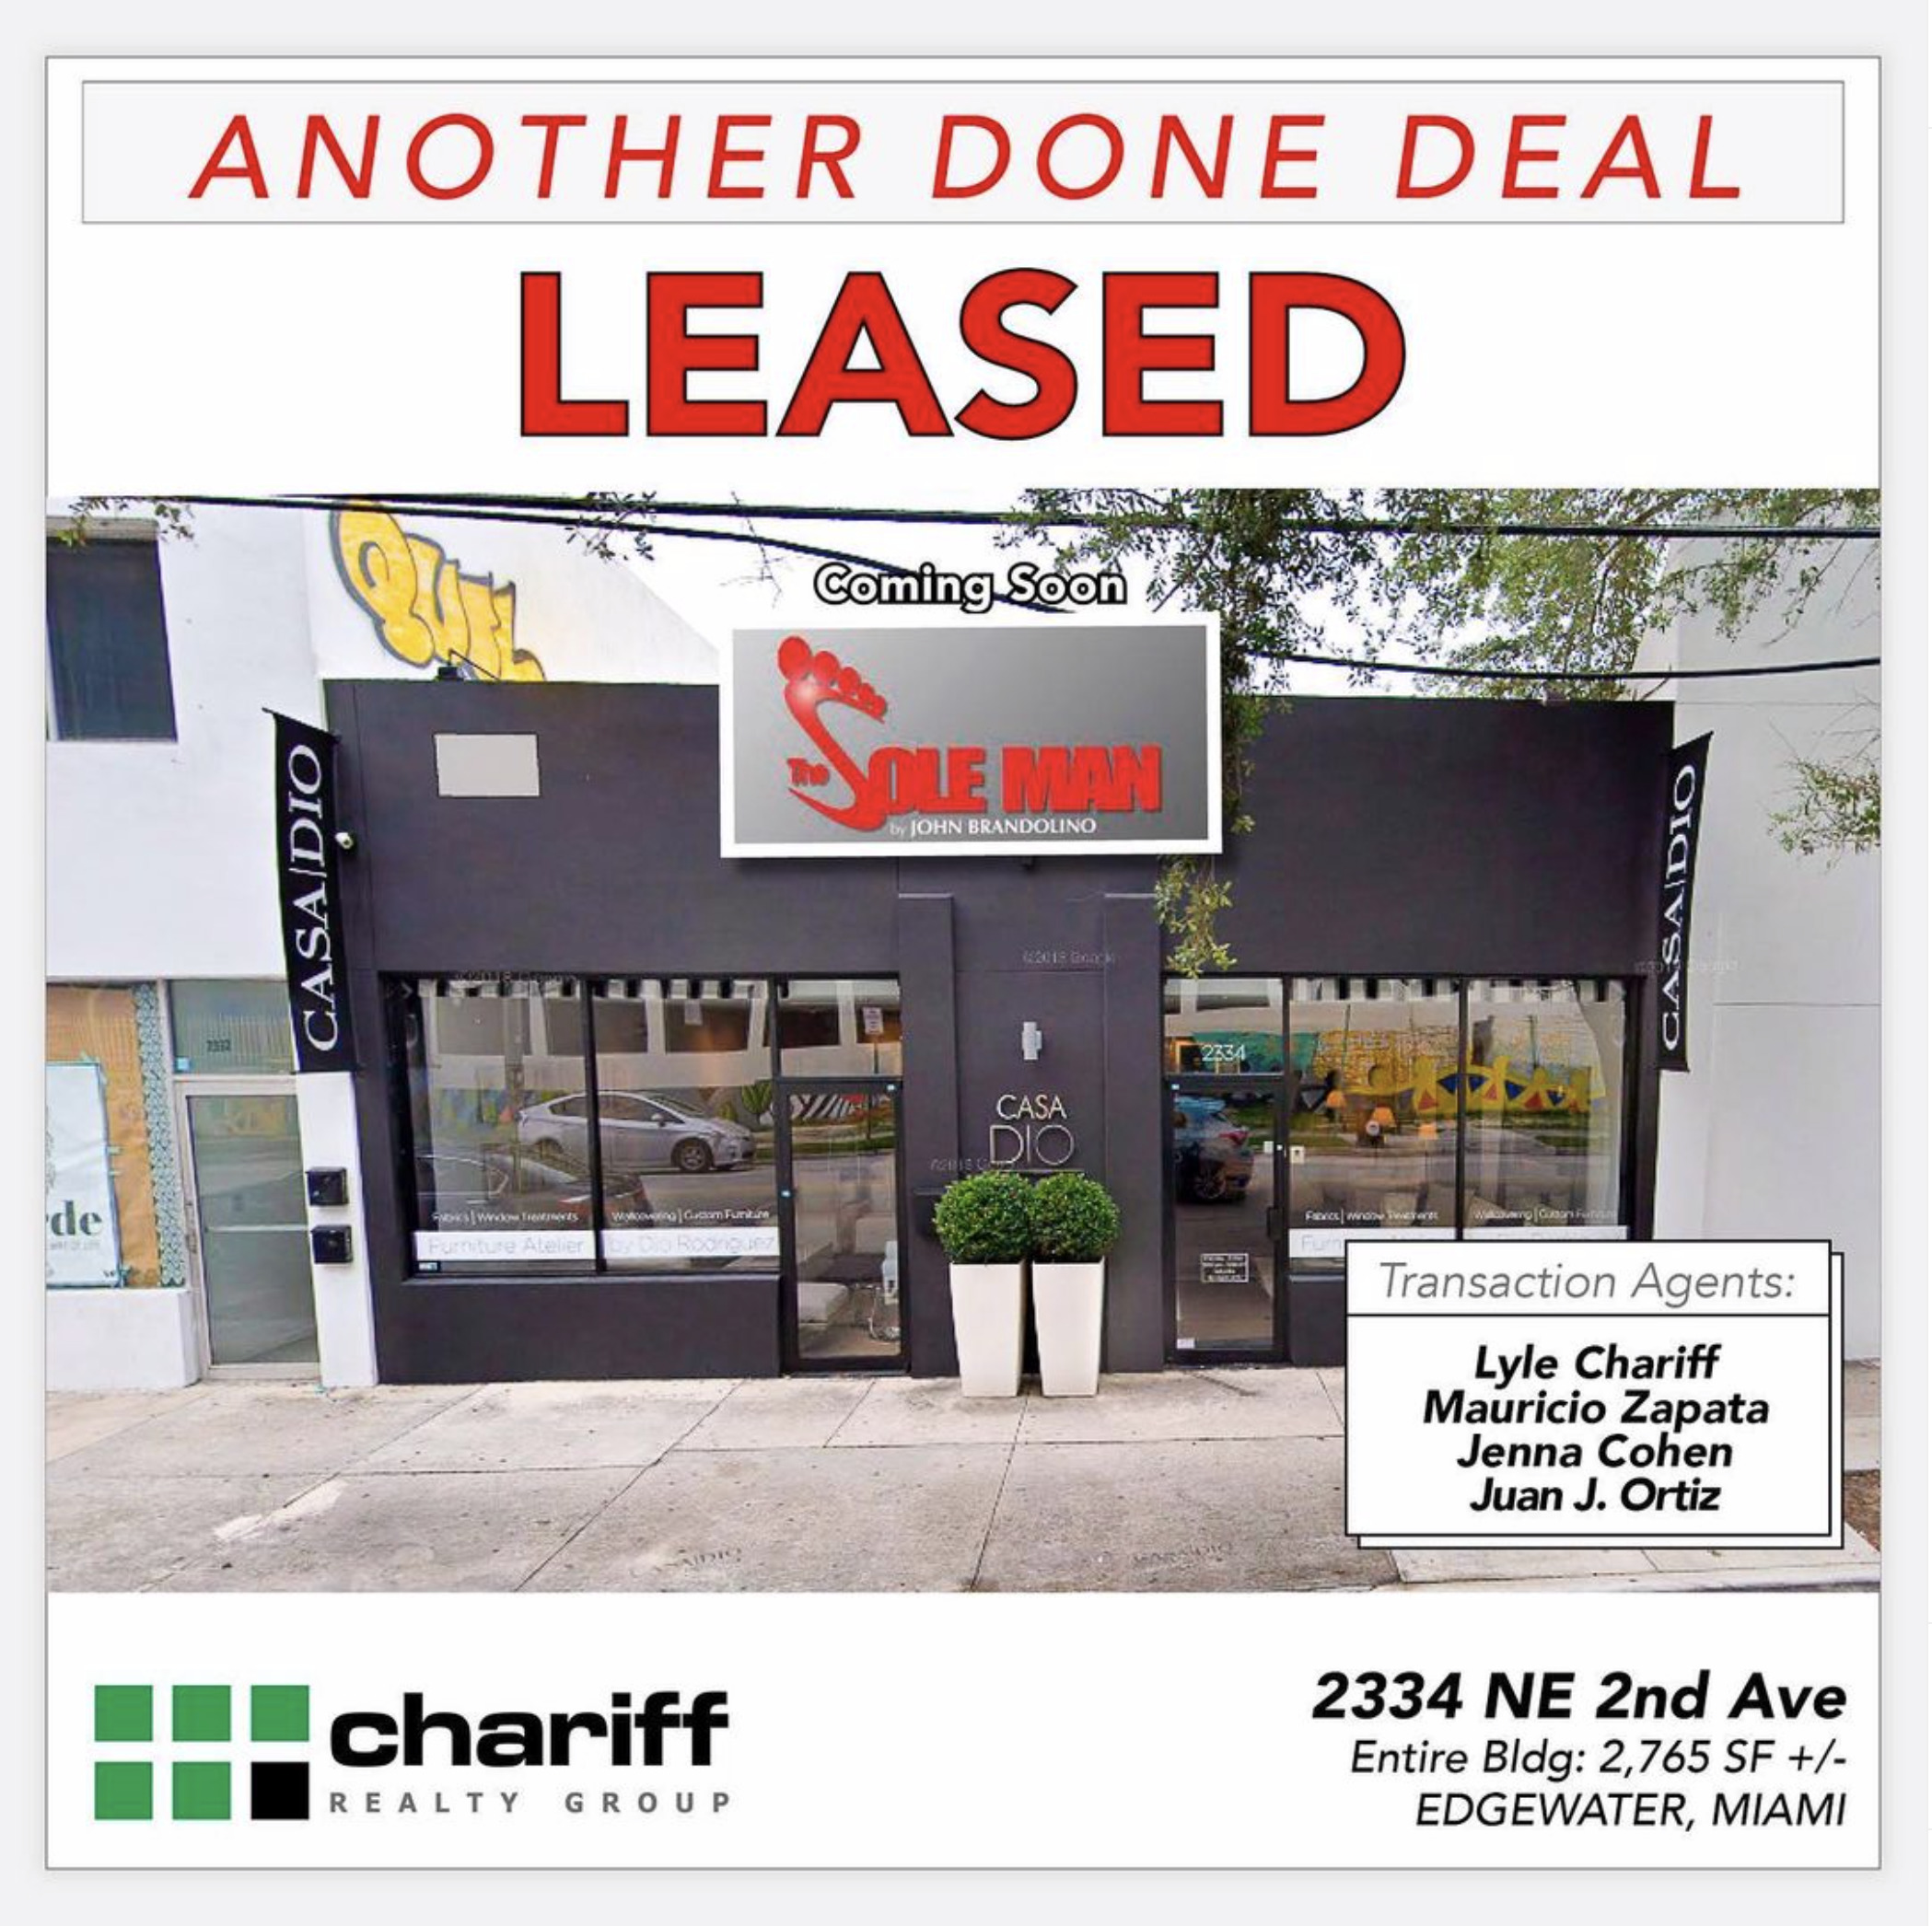 2334 NE 2nd Ave - Another Done Deal - Leased - Edgewater - Miami-Florida-33137-Chariff Realty Group